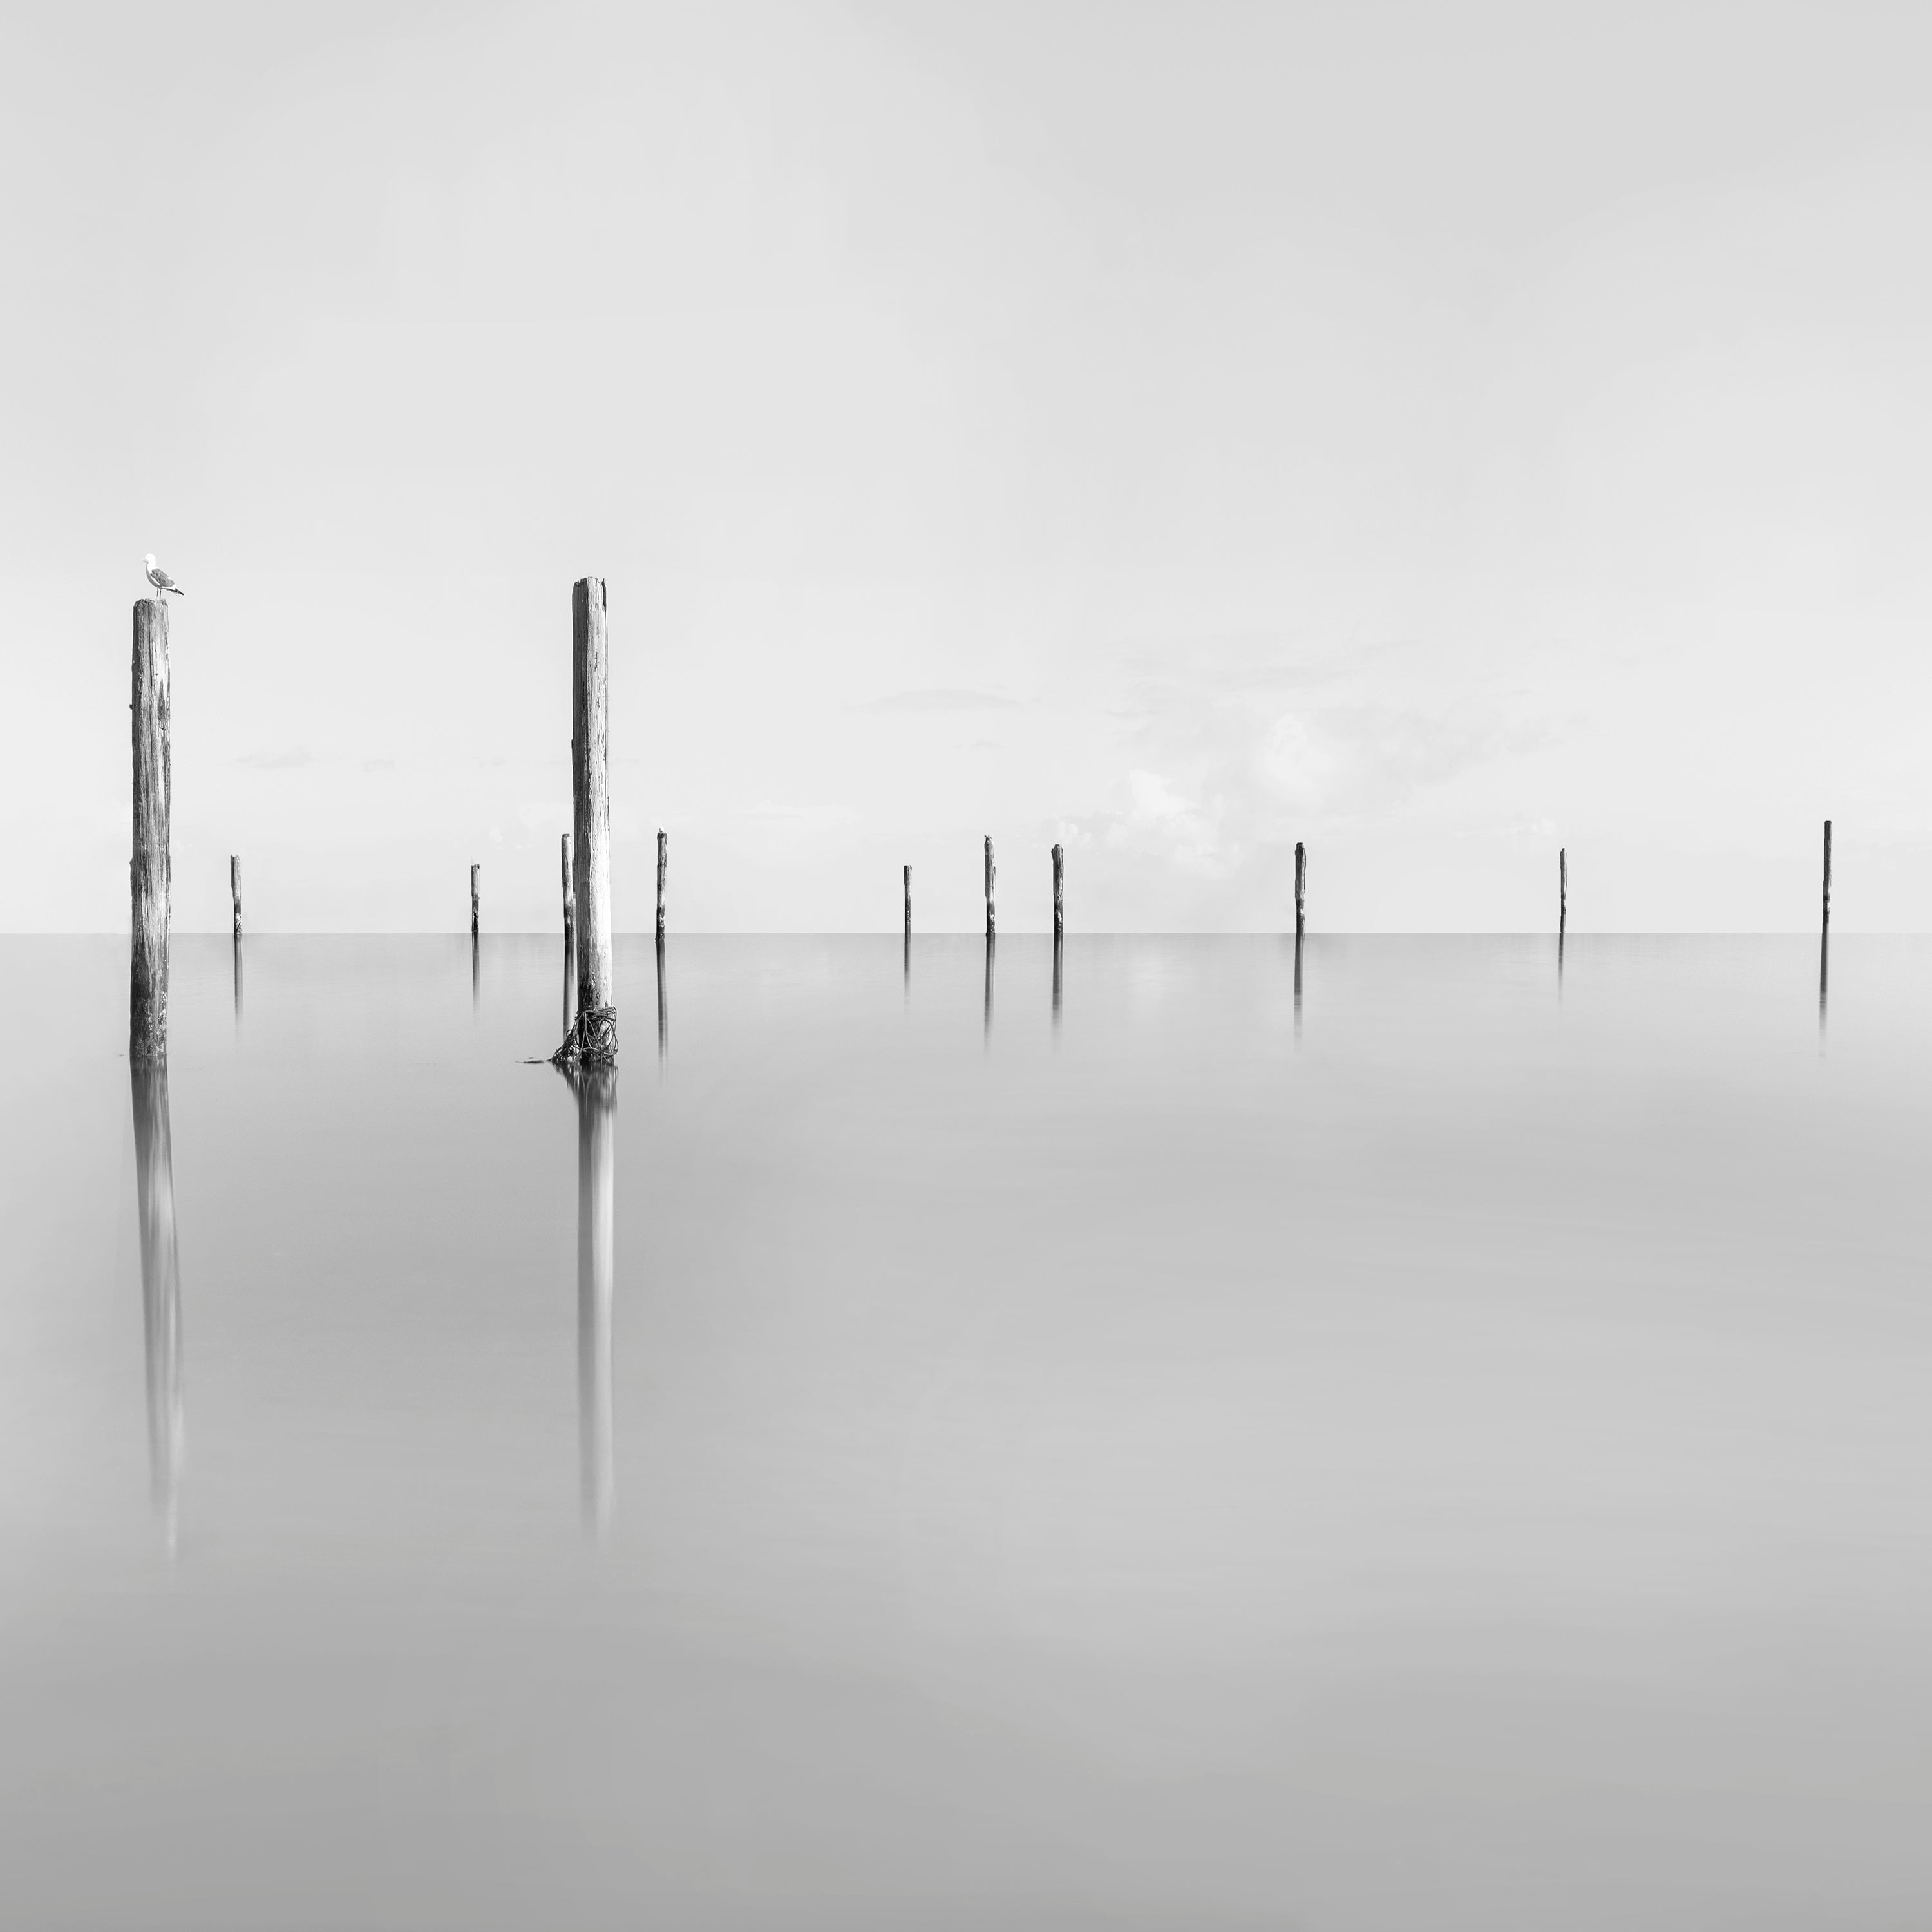 A black and white minimalism image of water groynes sticking out of the water